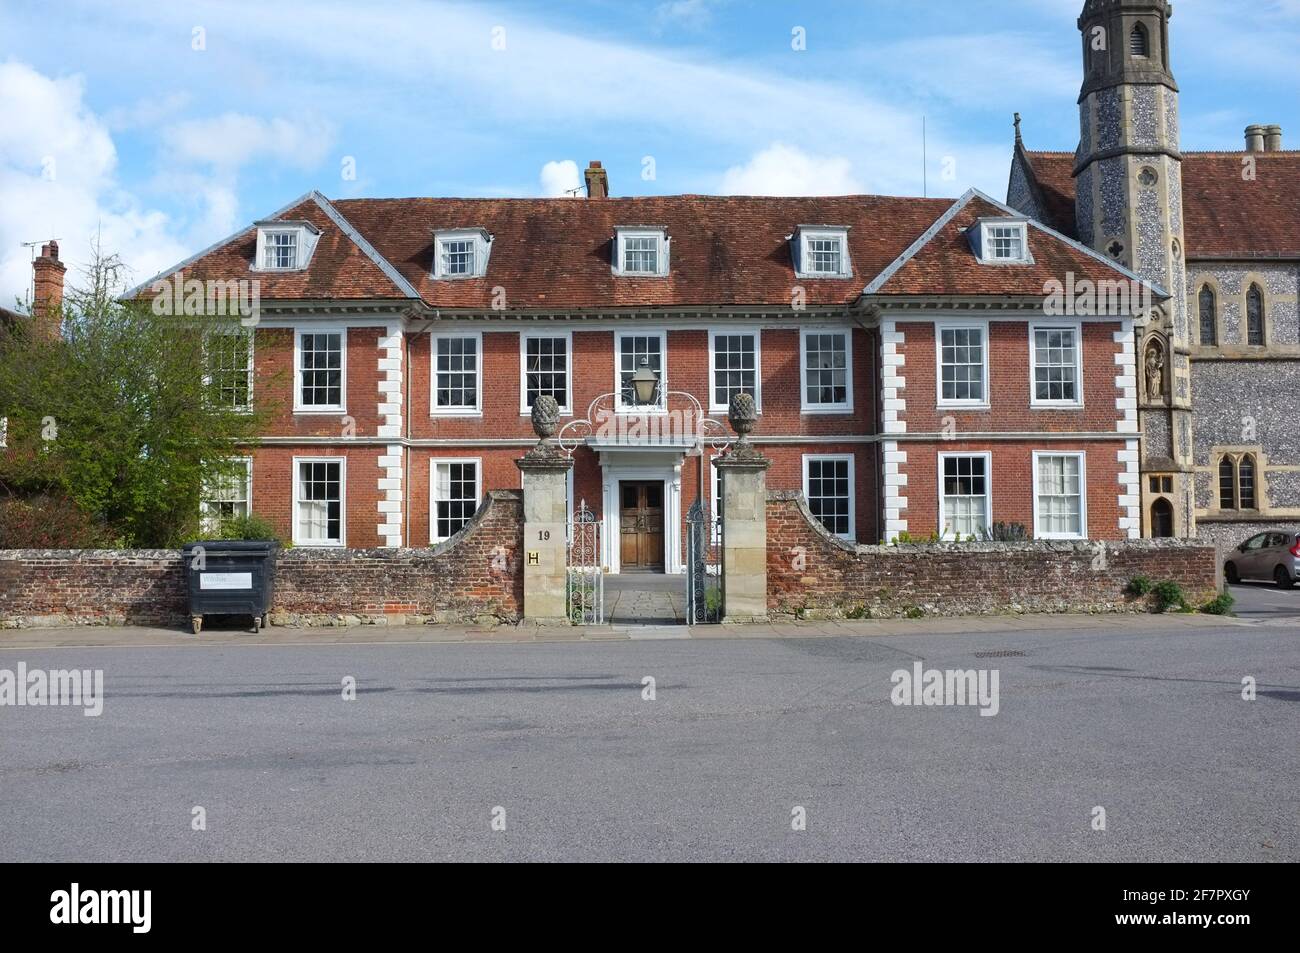 Sarum College in Salisbury Cathedral Close, Wiltshire. Centre of Theological learning. Built in 1677 and long been attributed to Christopher Wren. Stock Photo